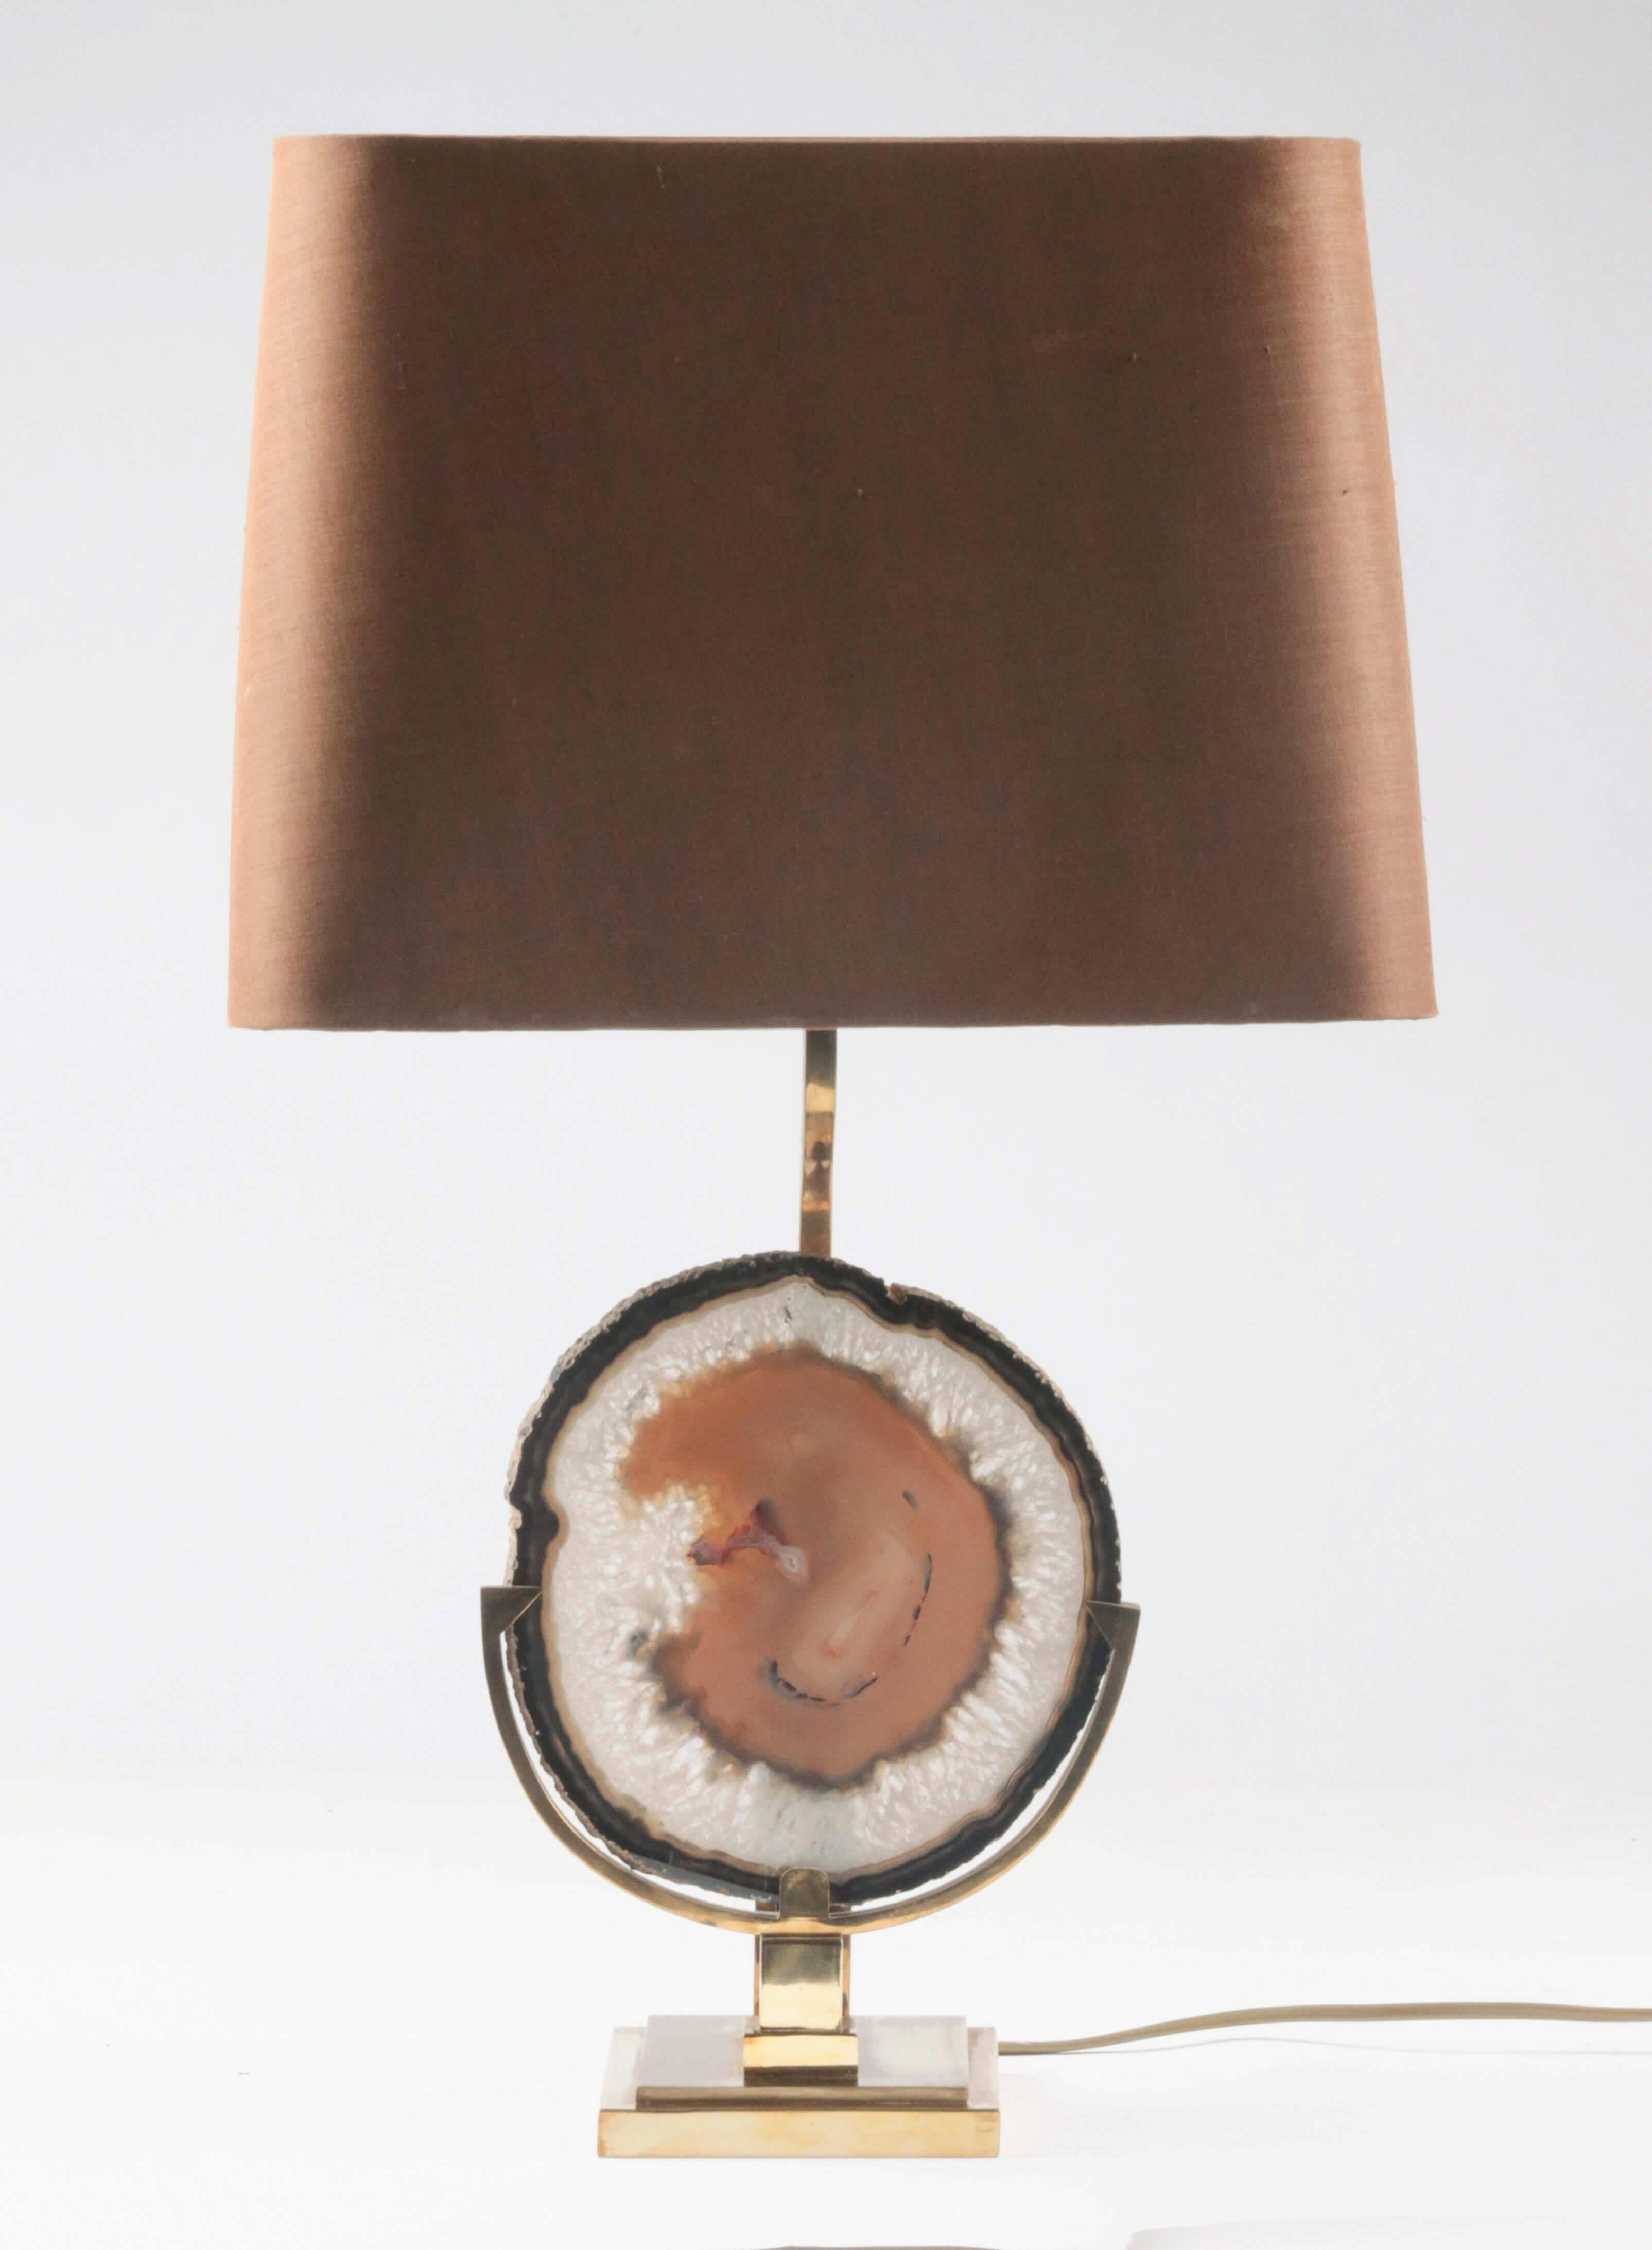 Beautiful copper table lamp, attributed to the Flemish designer Willy Daro. The lamp has multiple light points, so that the agate is beautifully lit from the back. The lampshade is covered with brown silk.